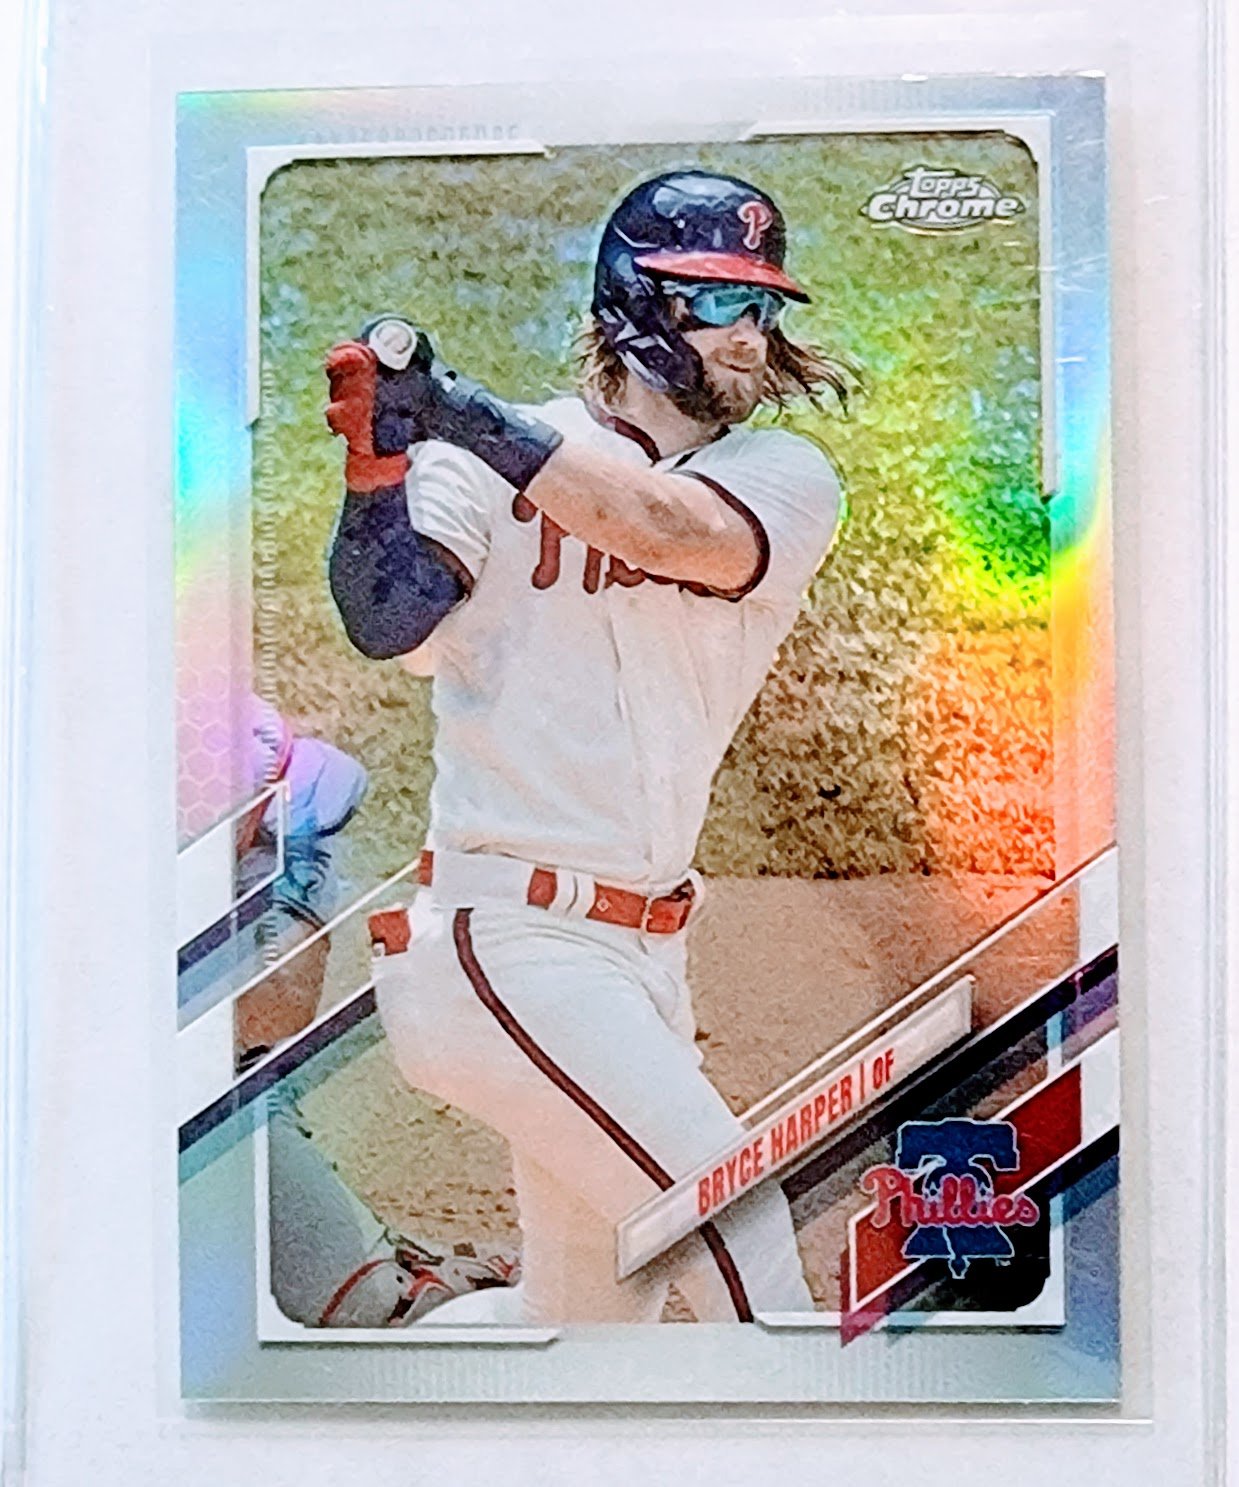 2020 Topps Chrome Bryce Harper Refractor Baseball Card TPTV simple Xclusive Collectibles   